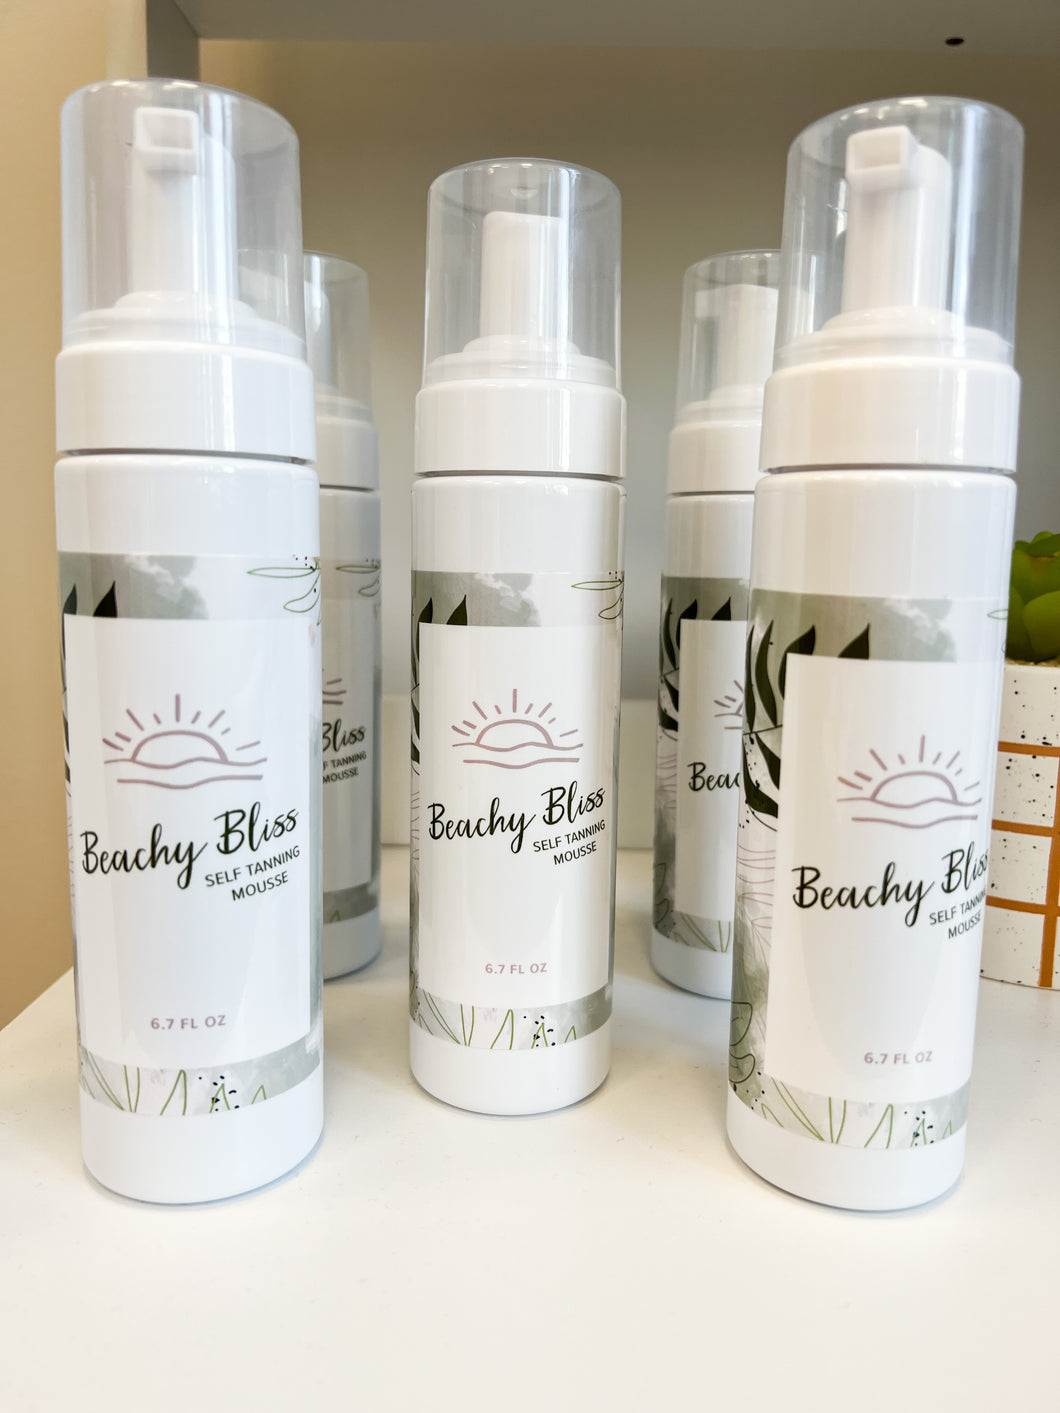 Beachy Bliss Self Tanning Mousse